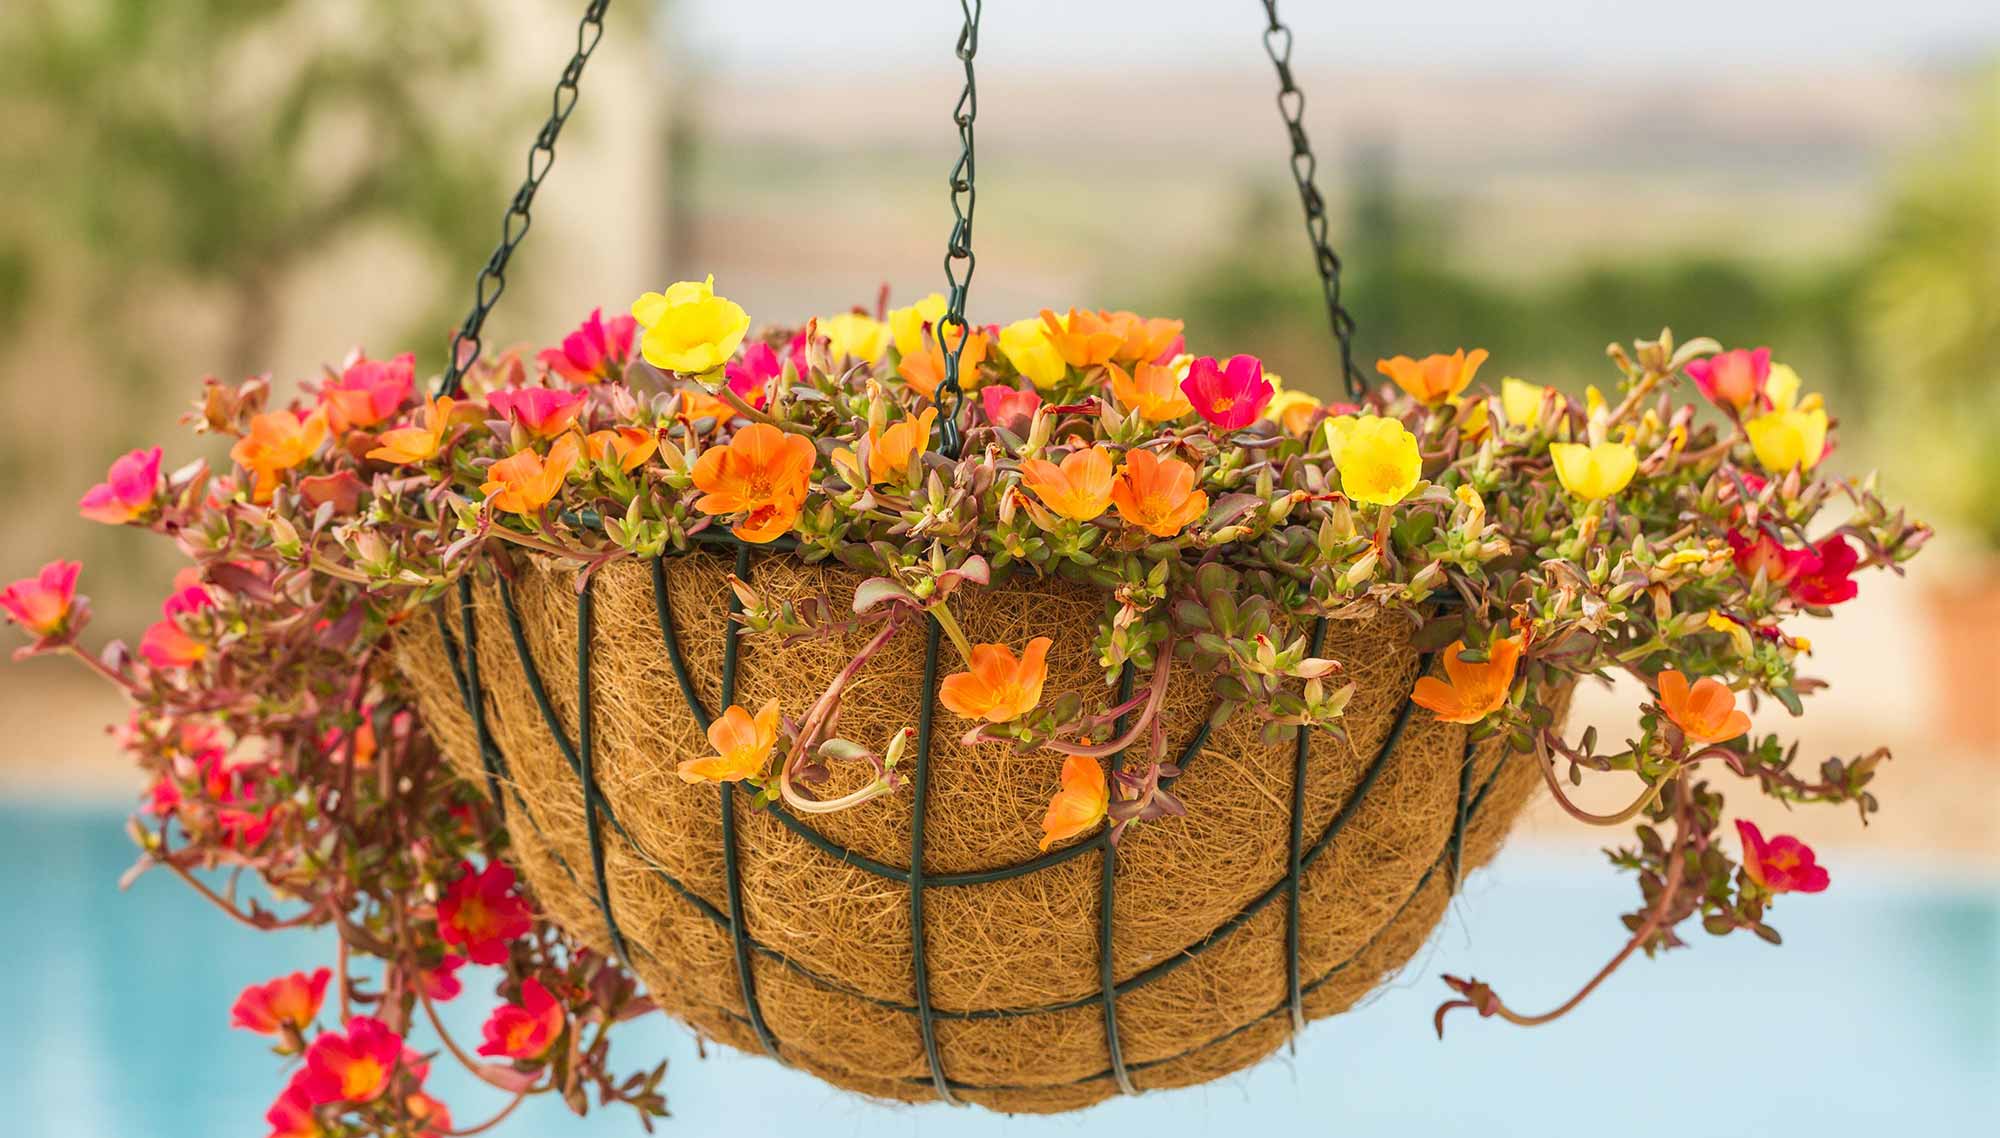 How To Keep Hanging Baskets From Drying Out